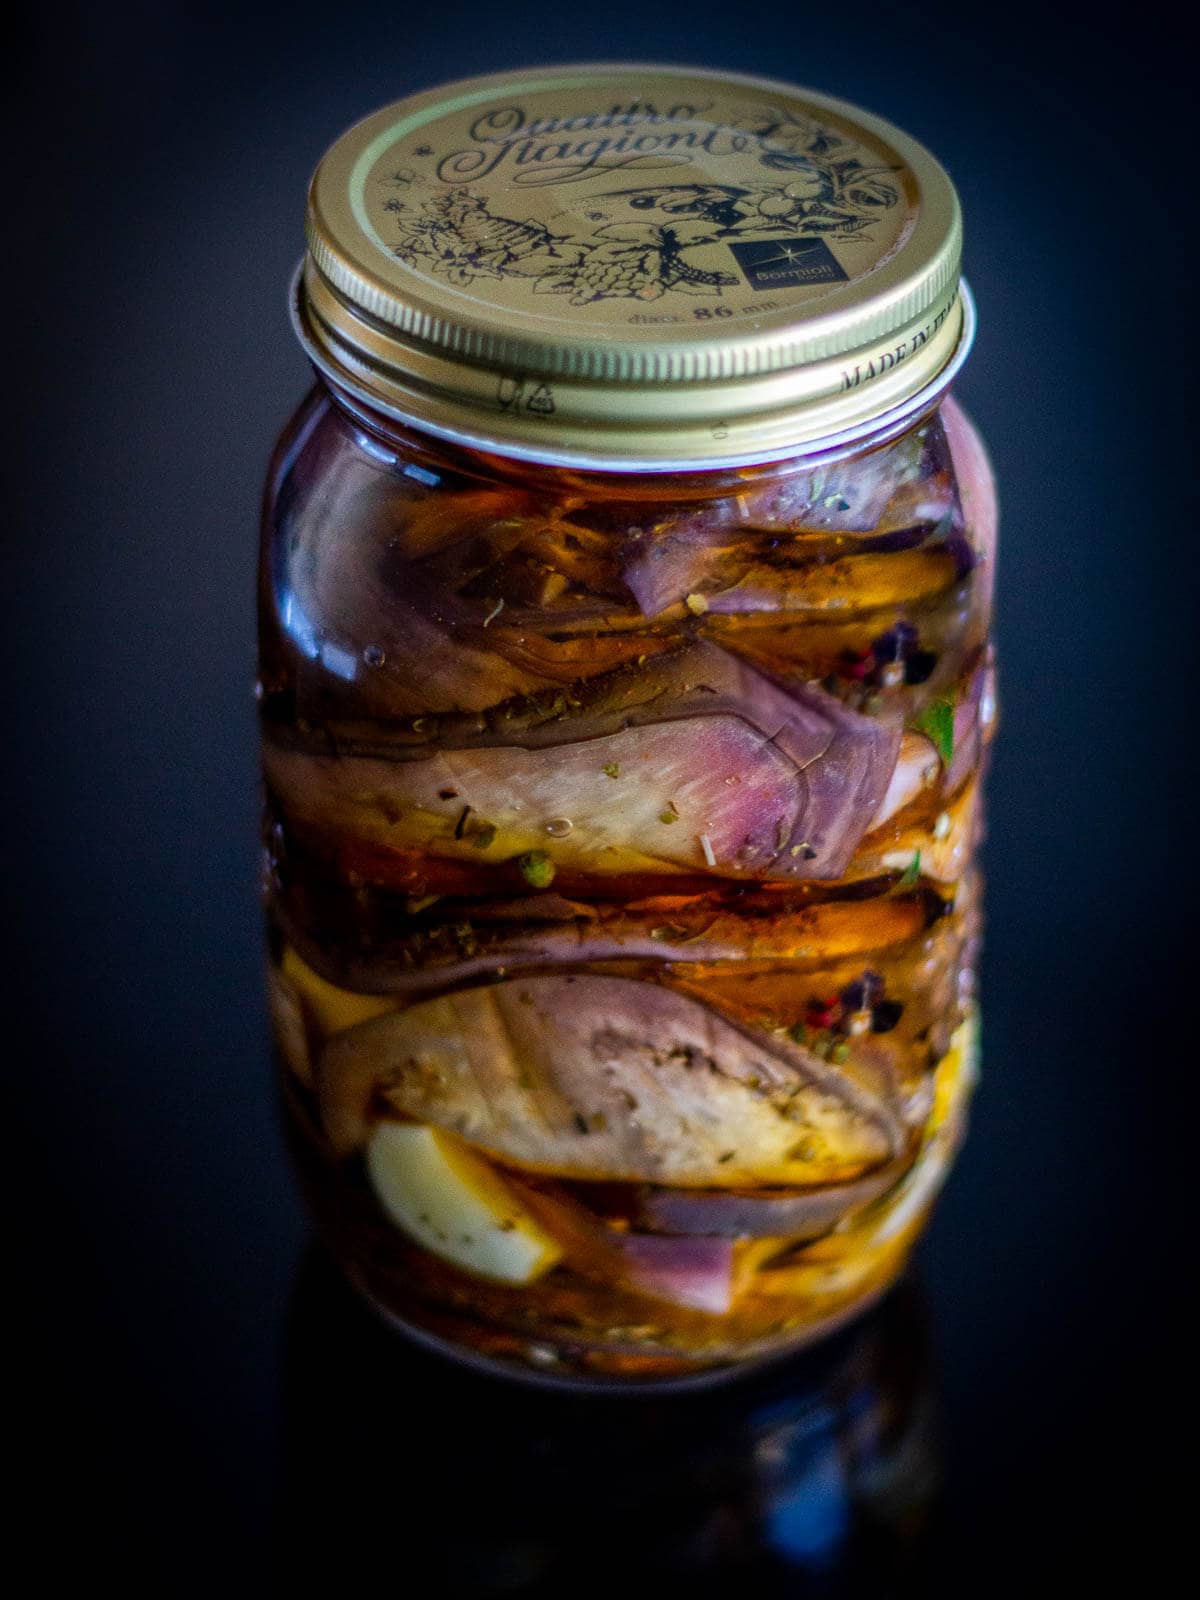 pickled eggplants canned and ready for consumption.